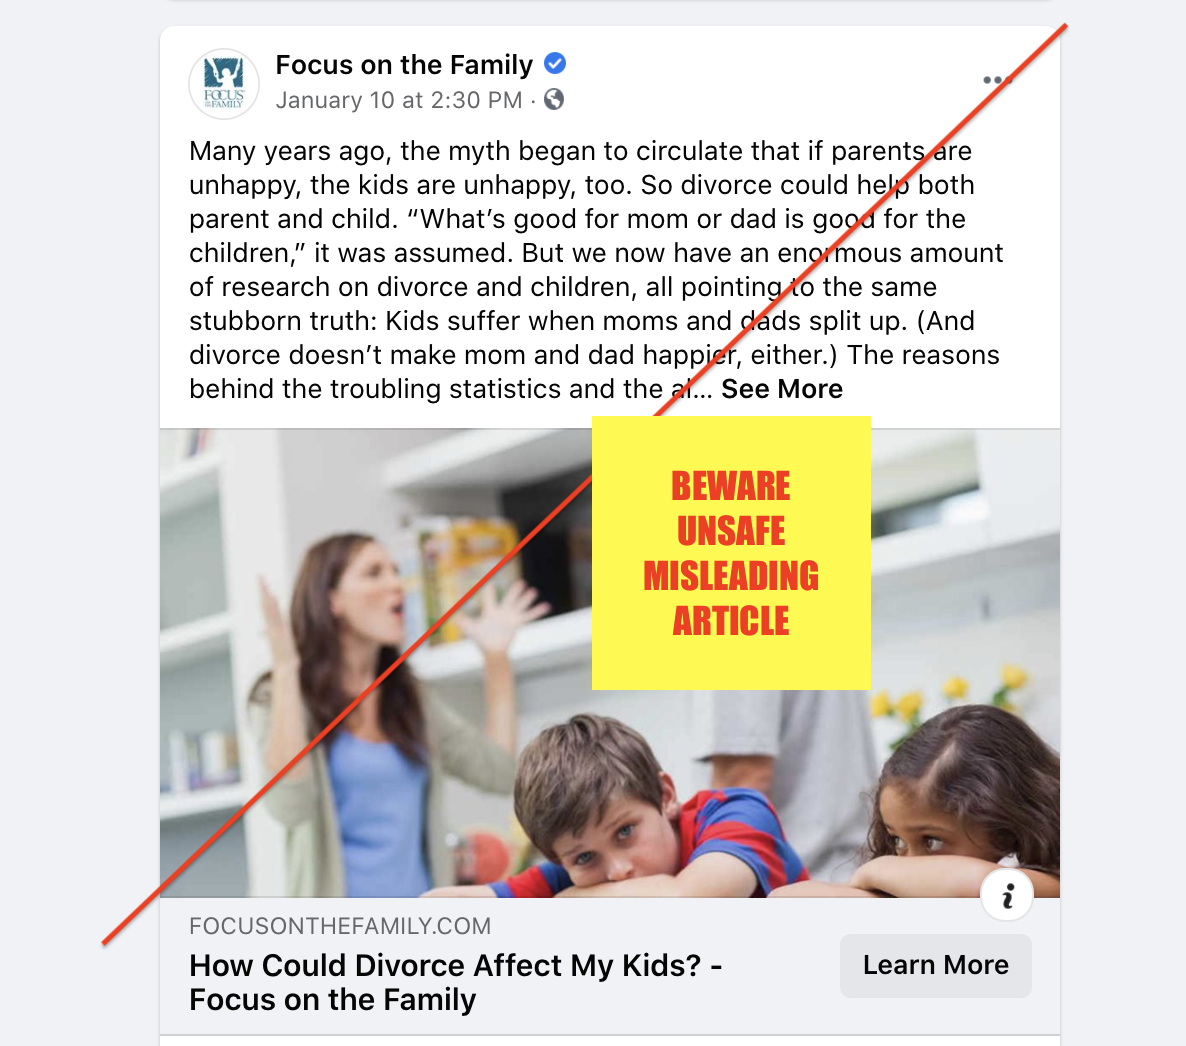 Focus on the Family article "How Could Divorce Affect My Kids?" is one of the most misleading and unsafe articles online. 